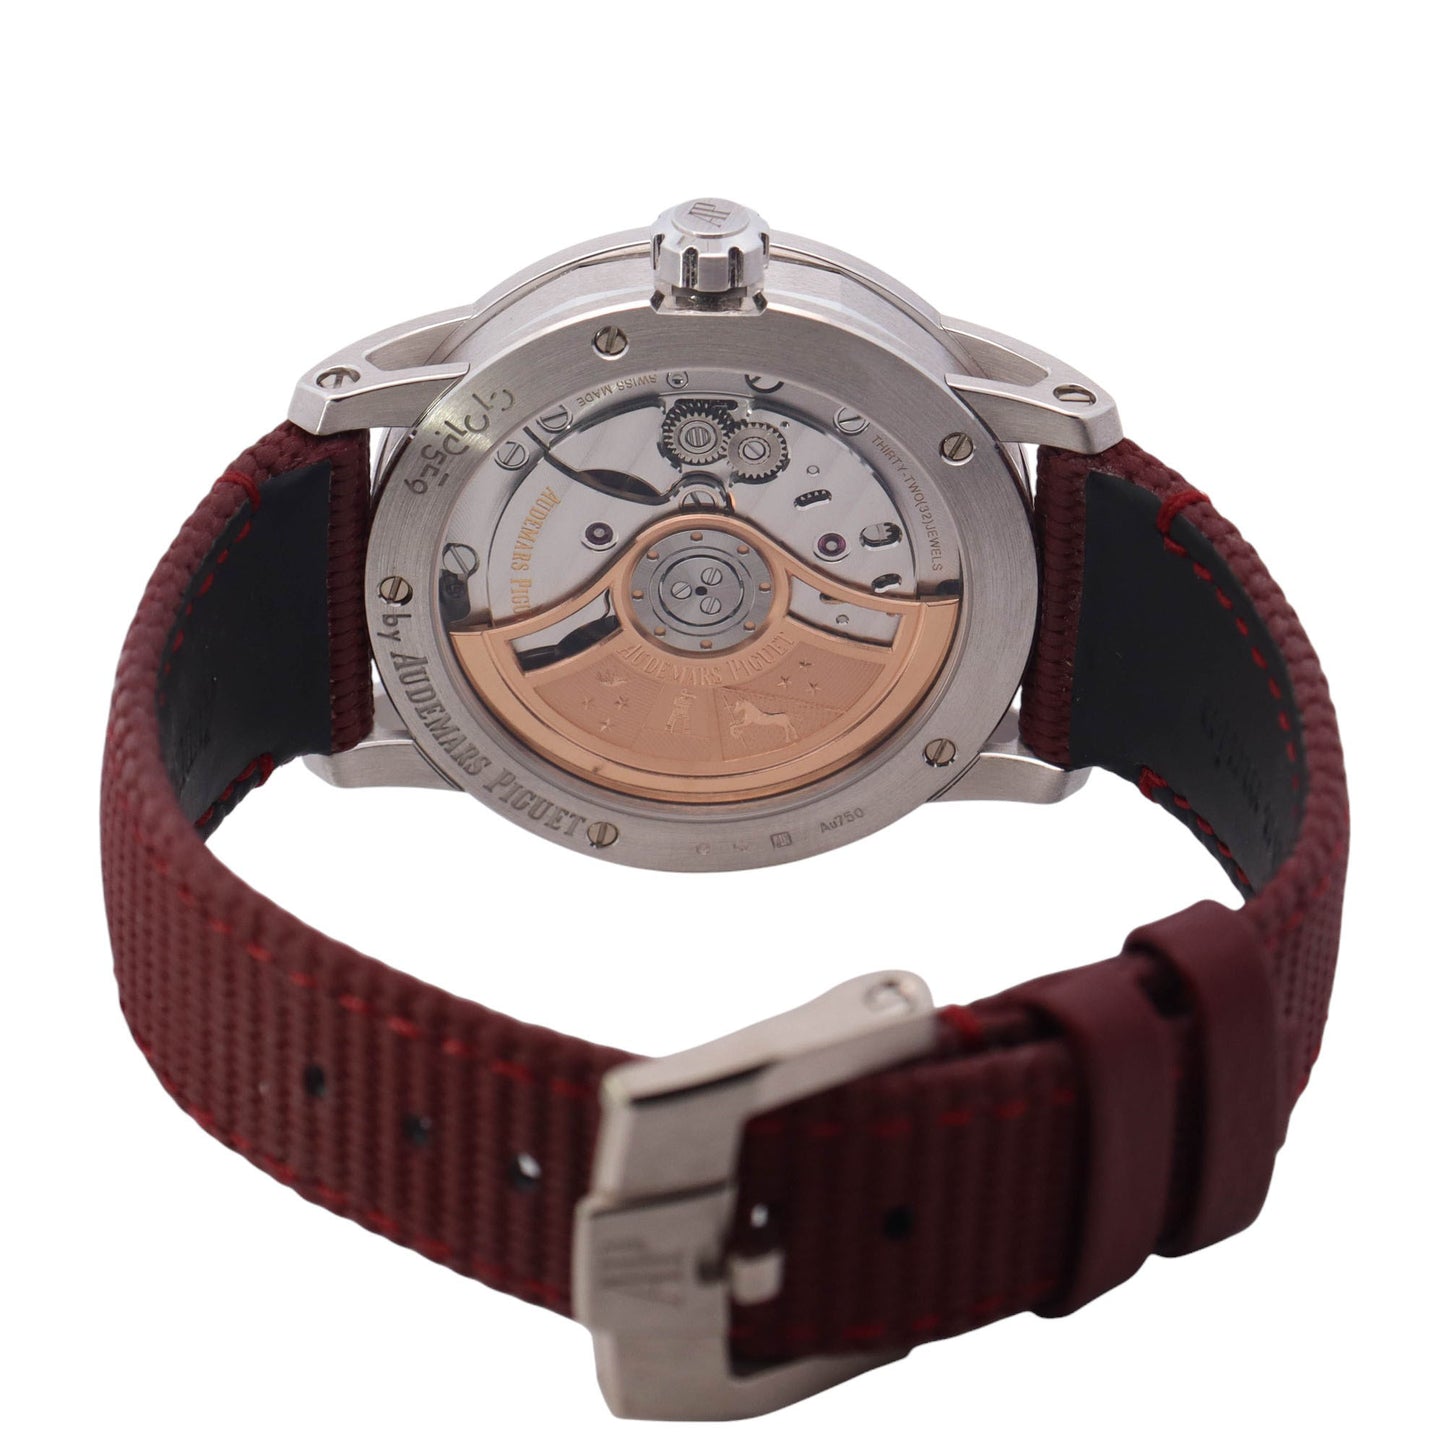 Audemars Piguet Code 11.59 White Gold 41mm Dark Red Arabic & Stick Dial Watch Reference# 15210BC.OO.A068CR.01 - Happy Jewelers Fine Jewelry Lifetime Warranty